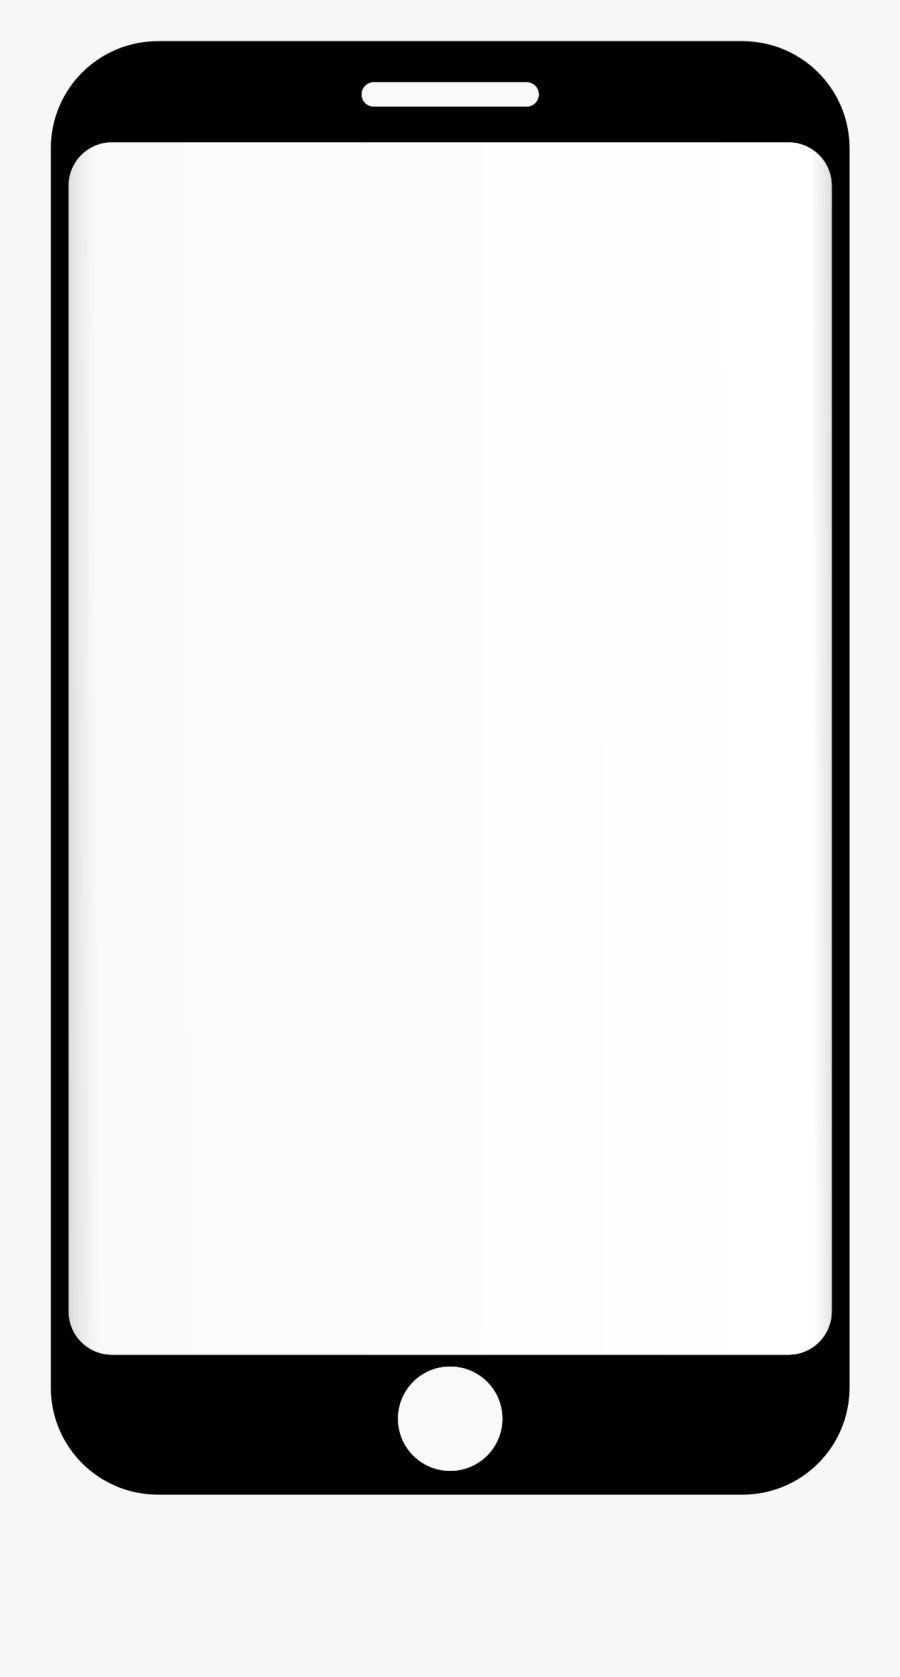 Generic Edge Rounded Big - Generic Android Phone, Transparent Clipart